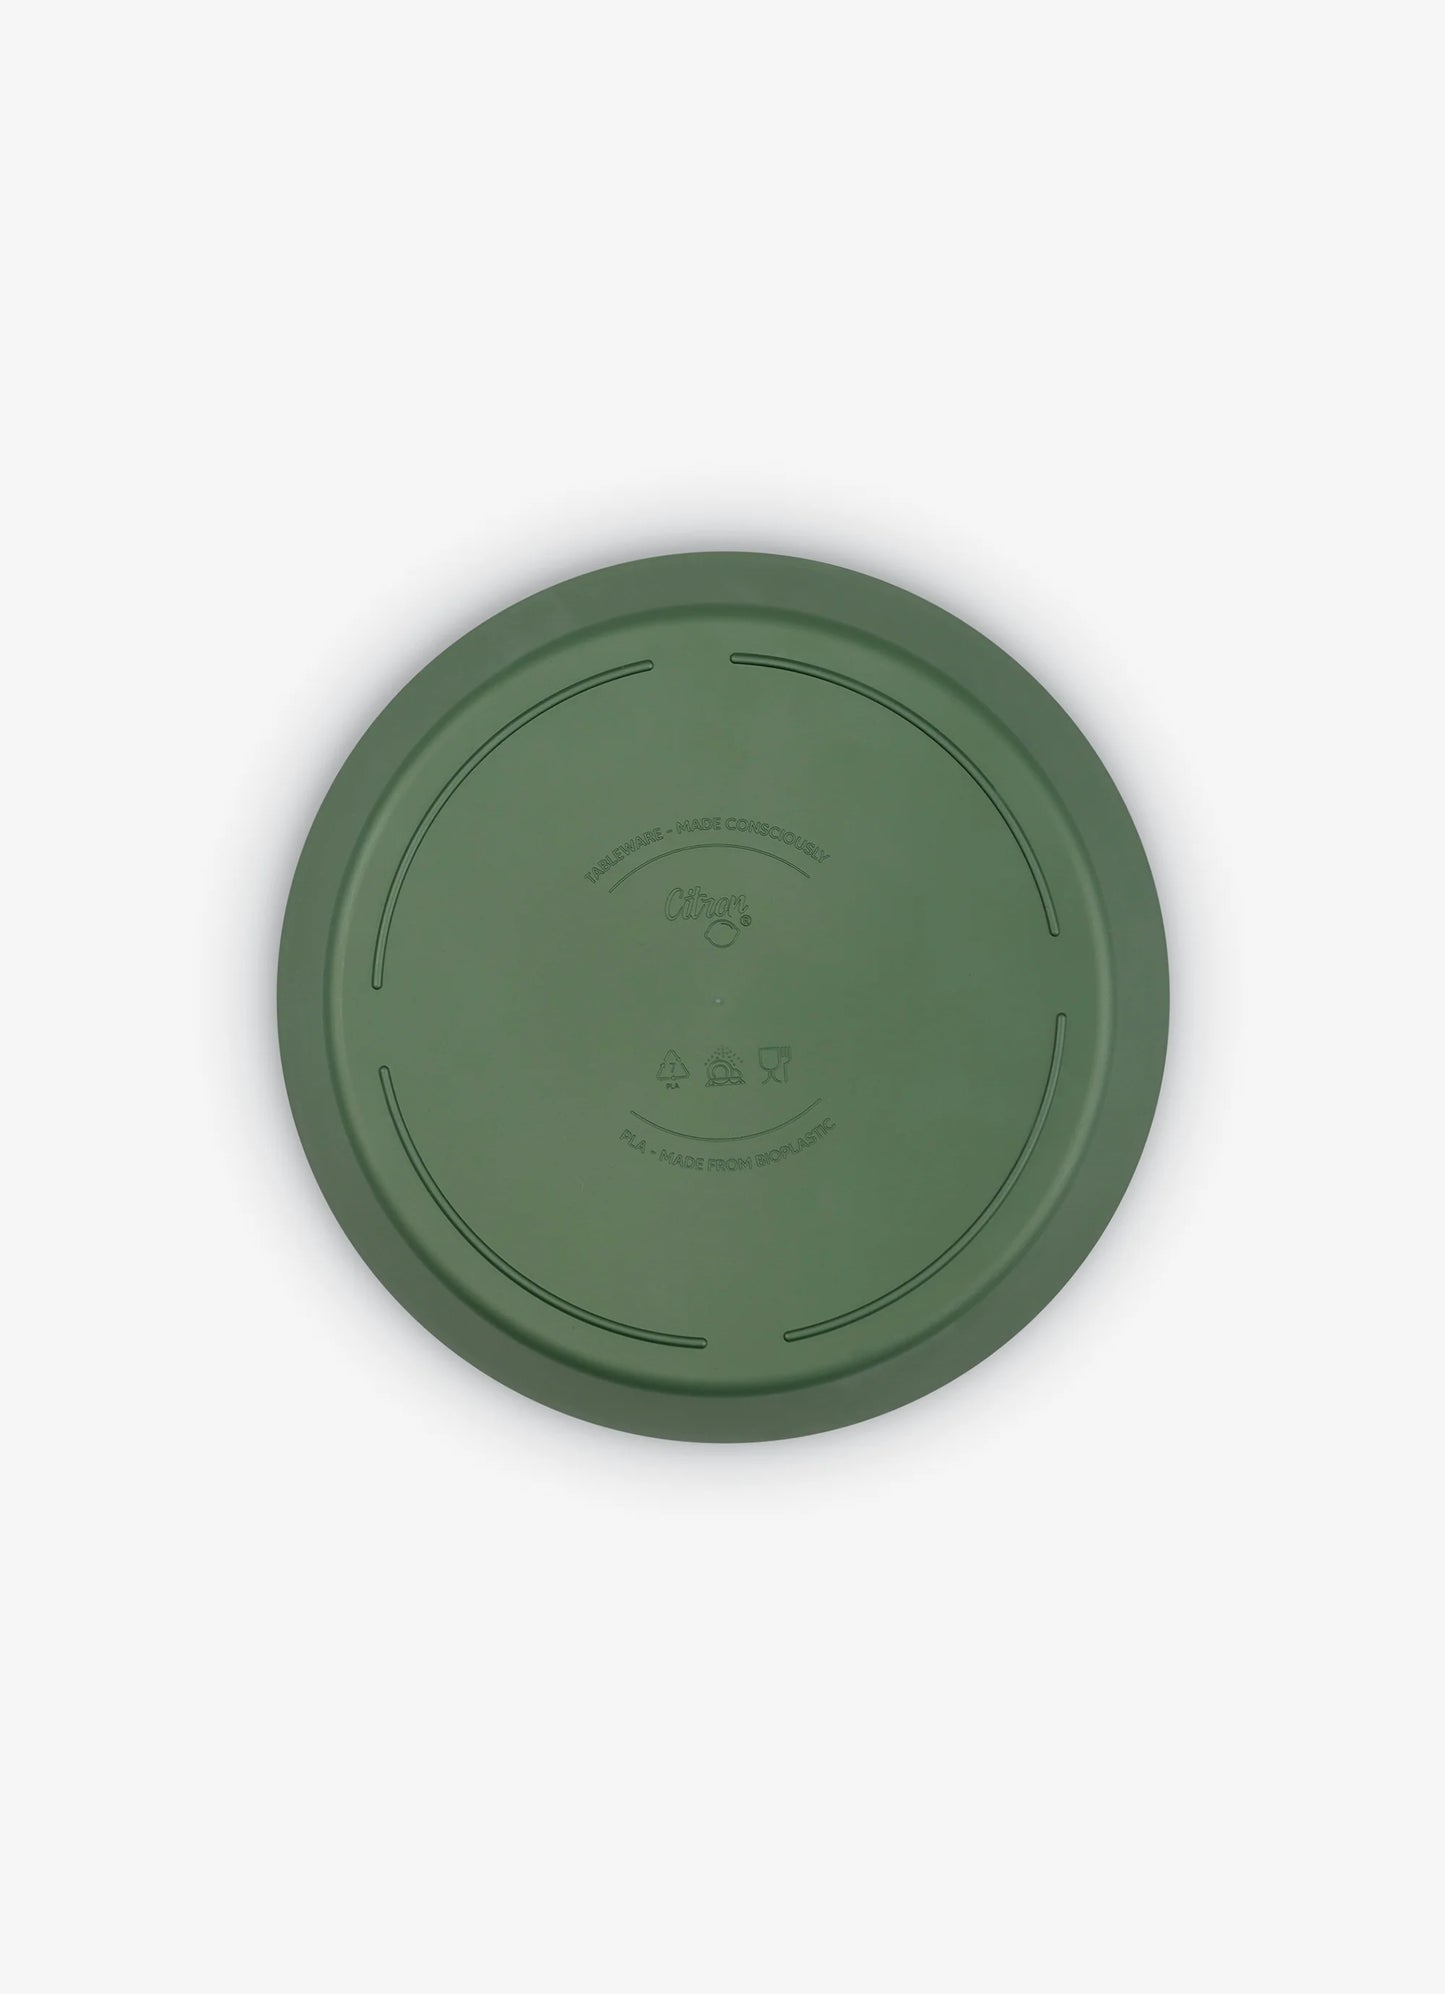 Eco Plates Set of 4 in Green/Cream